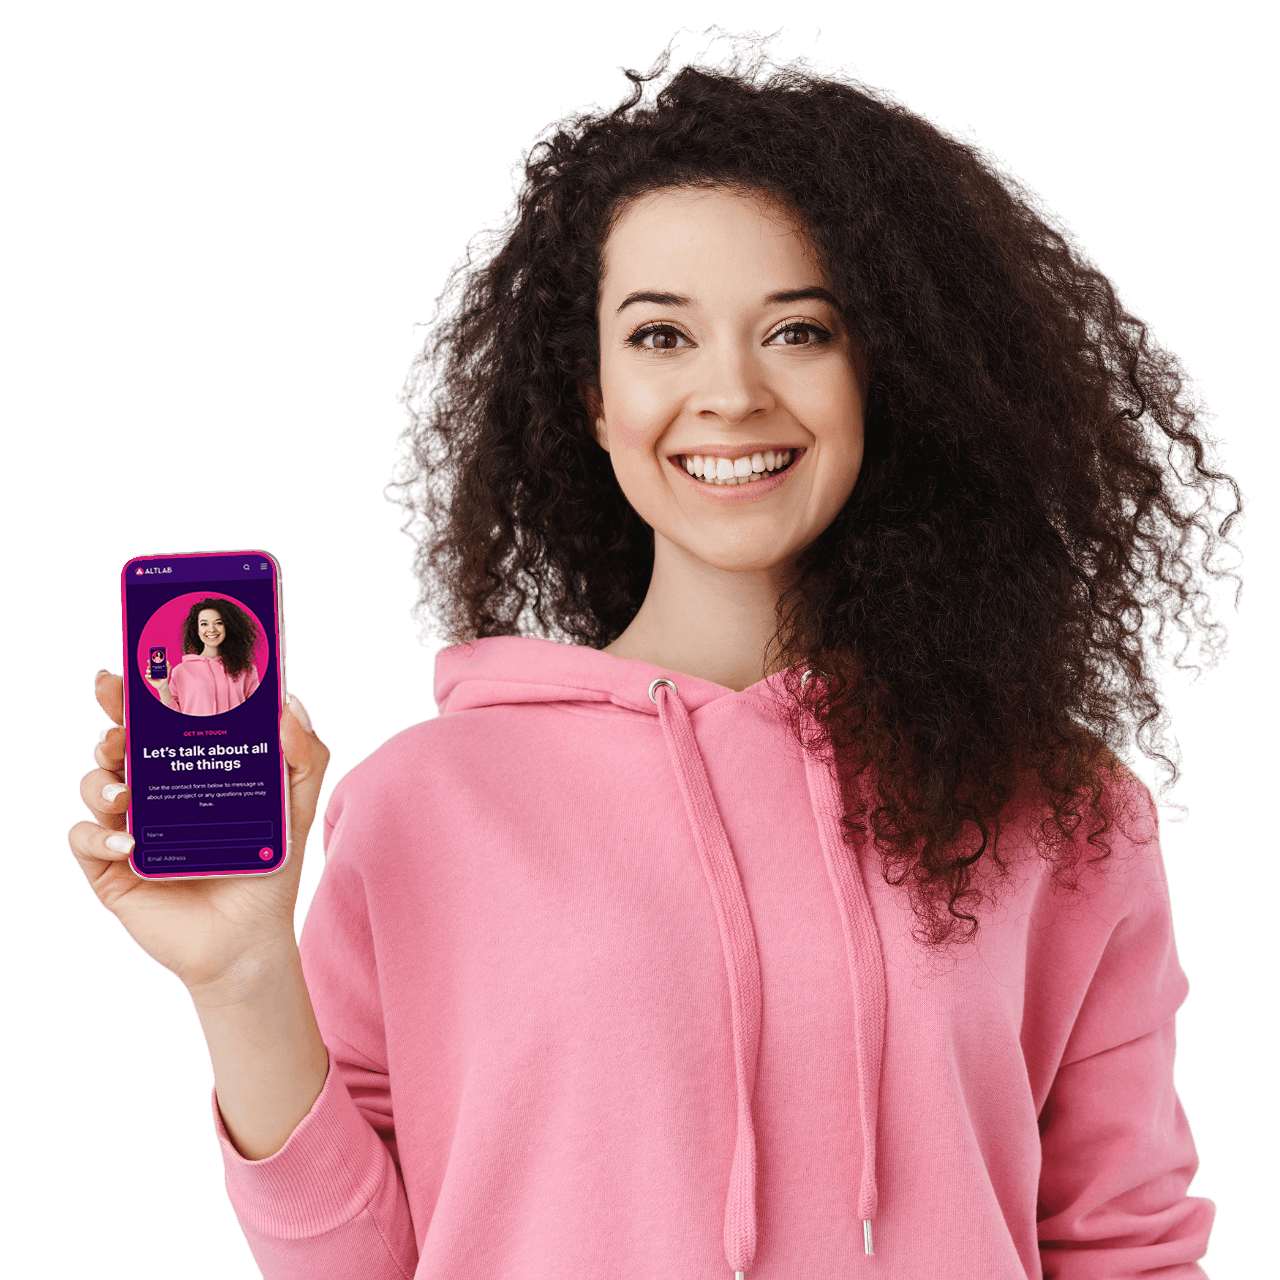 Curly haired girl holding smartphone